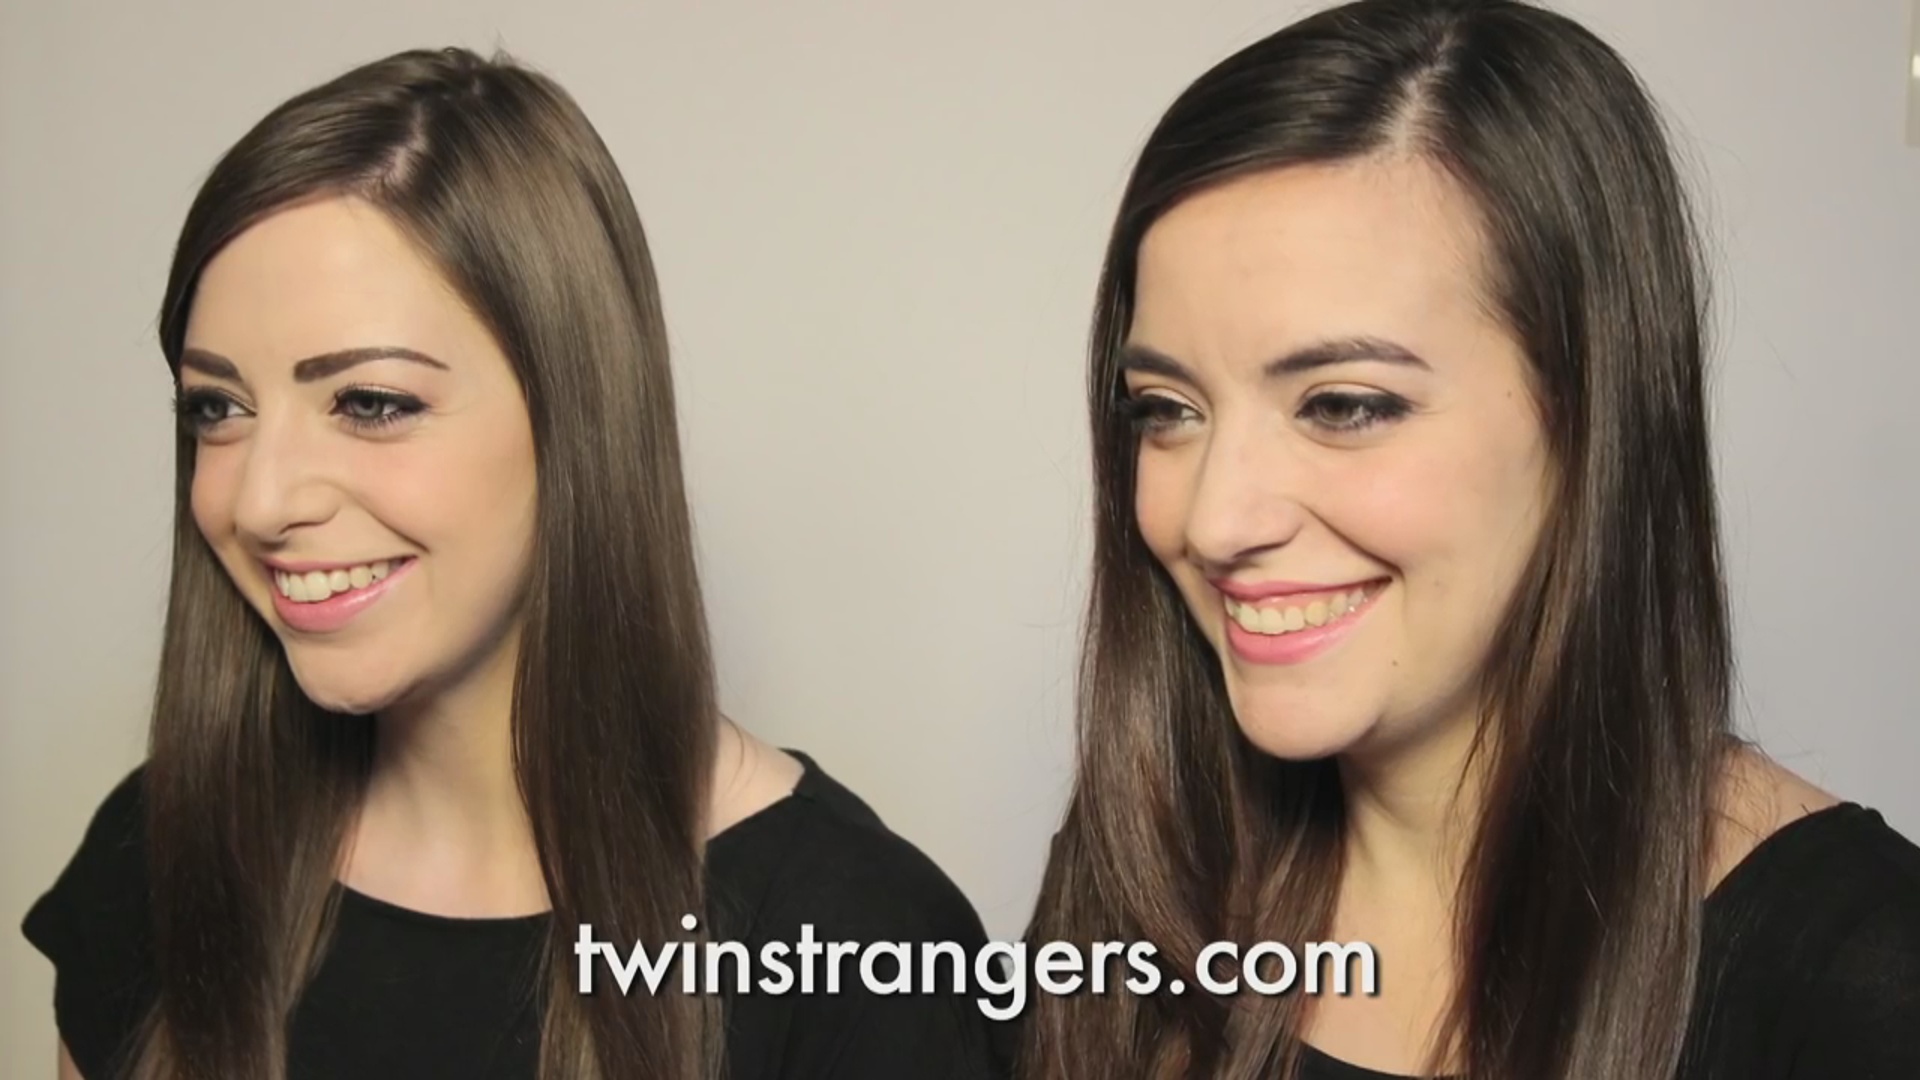 Find Your Doppelganger: Do You Have a Look-alike?